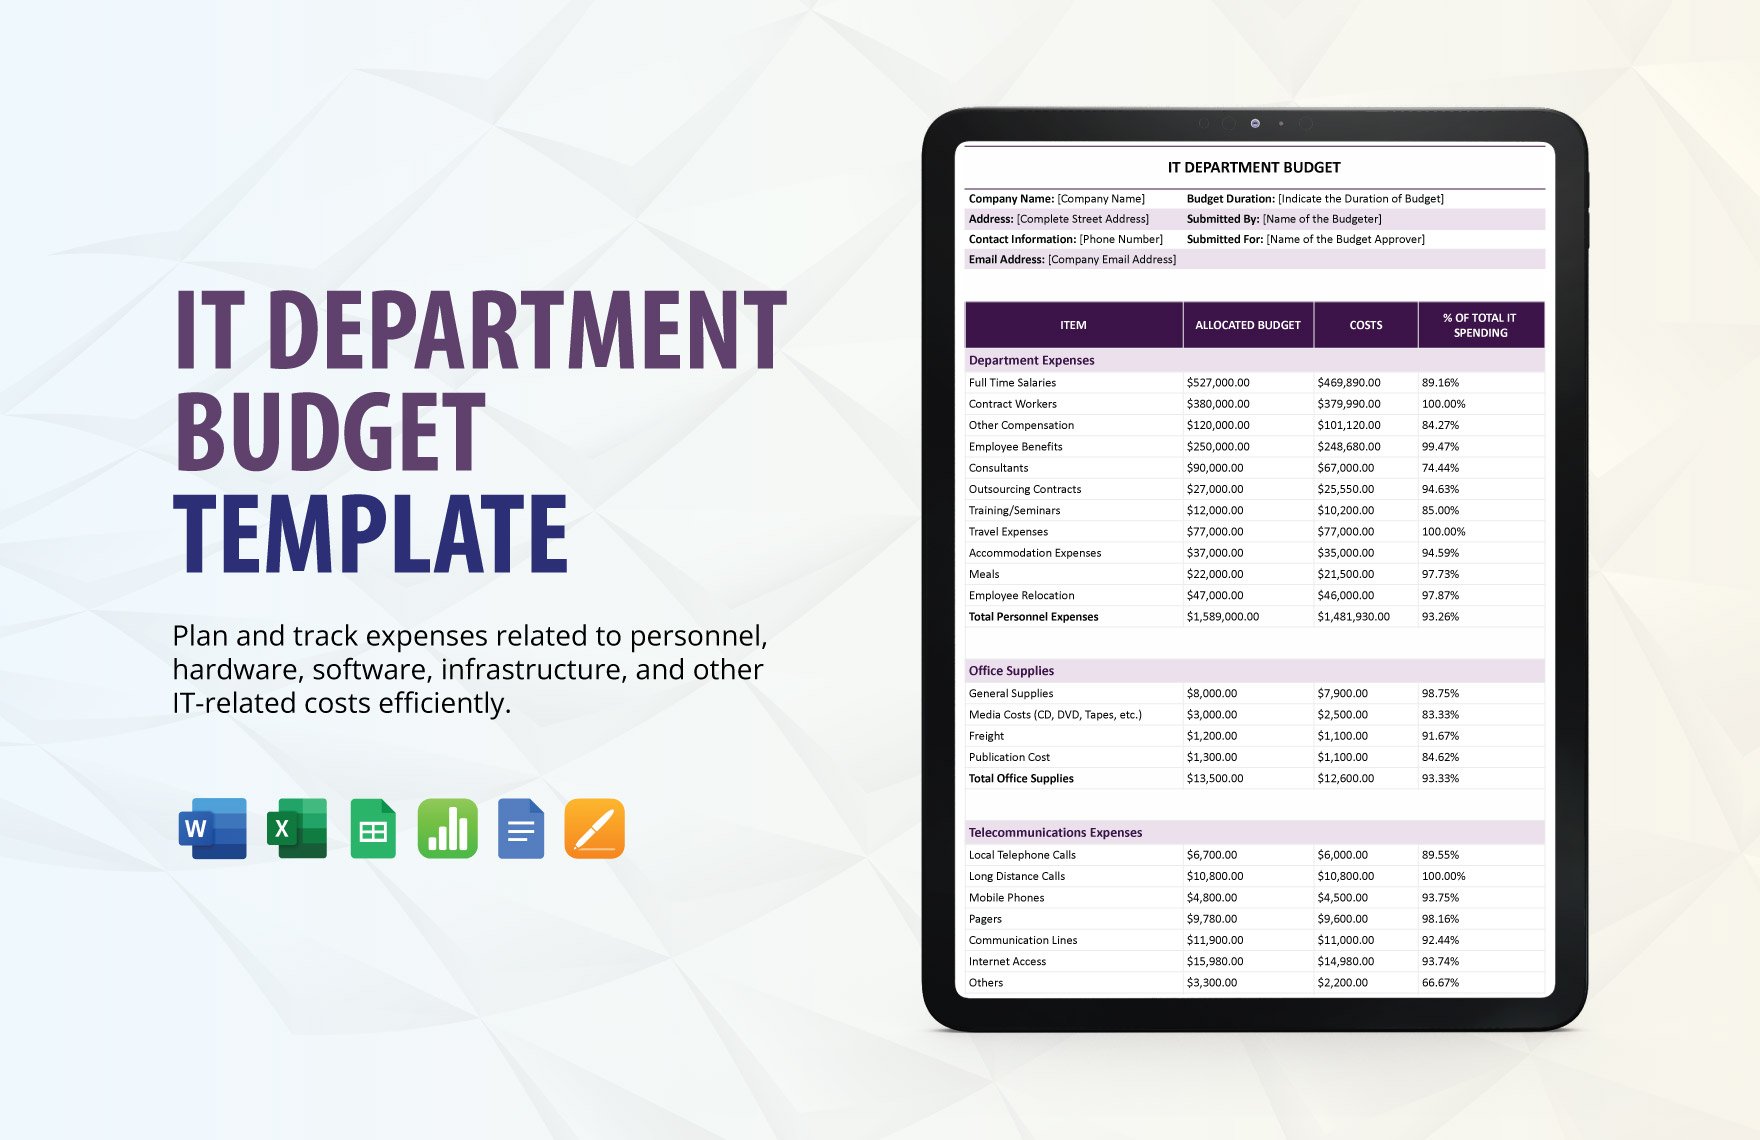 IT Department Budget Template in Word, Google Docs, Excel, Google Sheets, Apple Pages, Apple Numbers